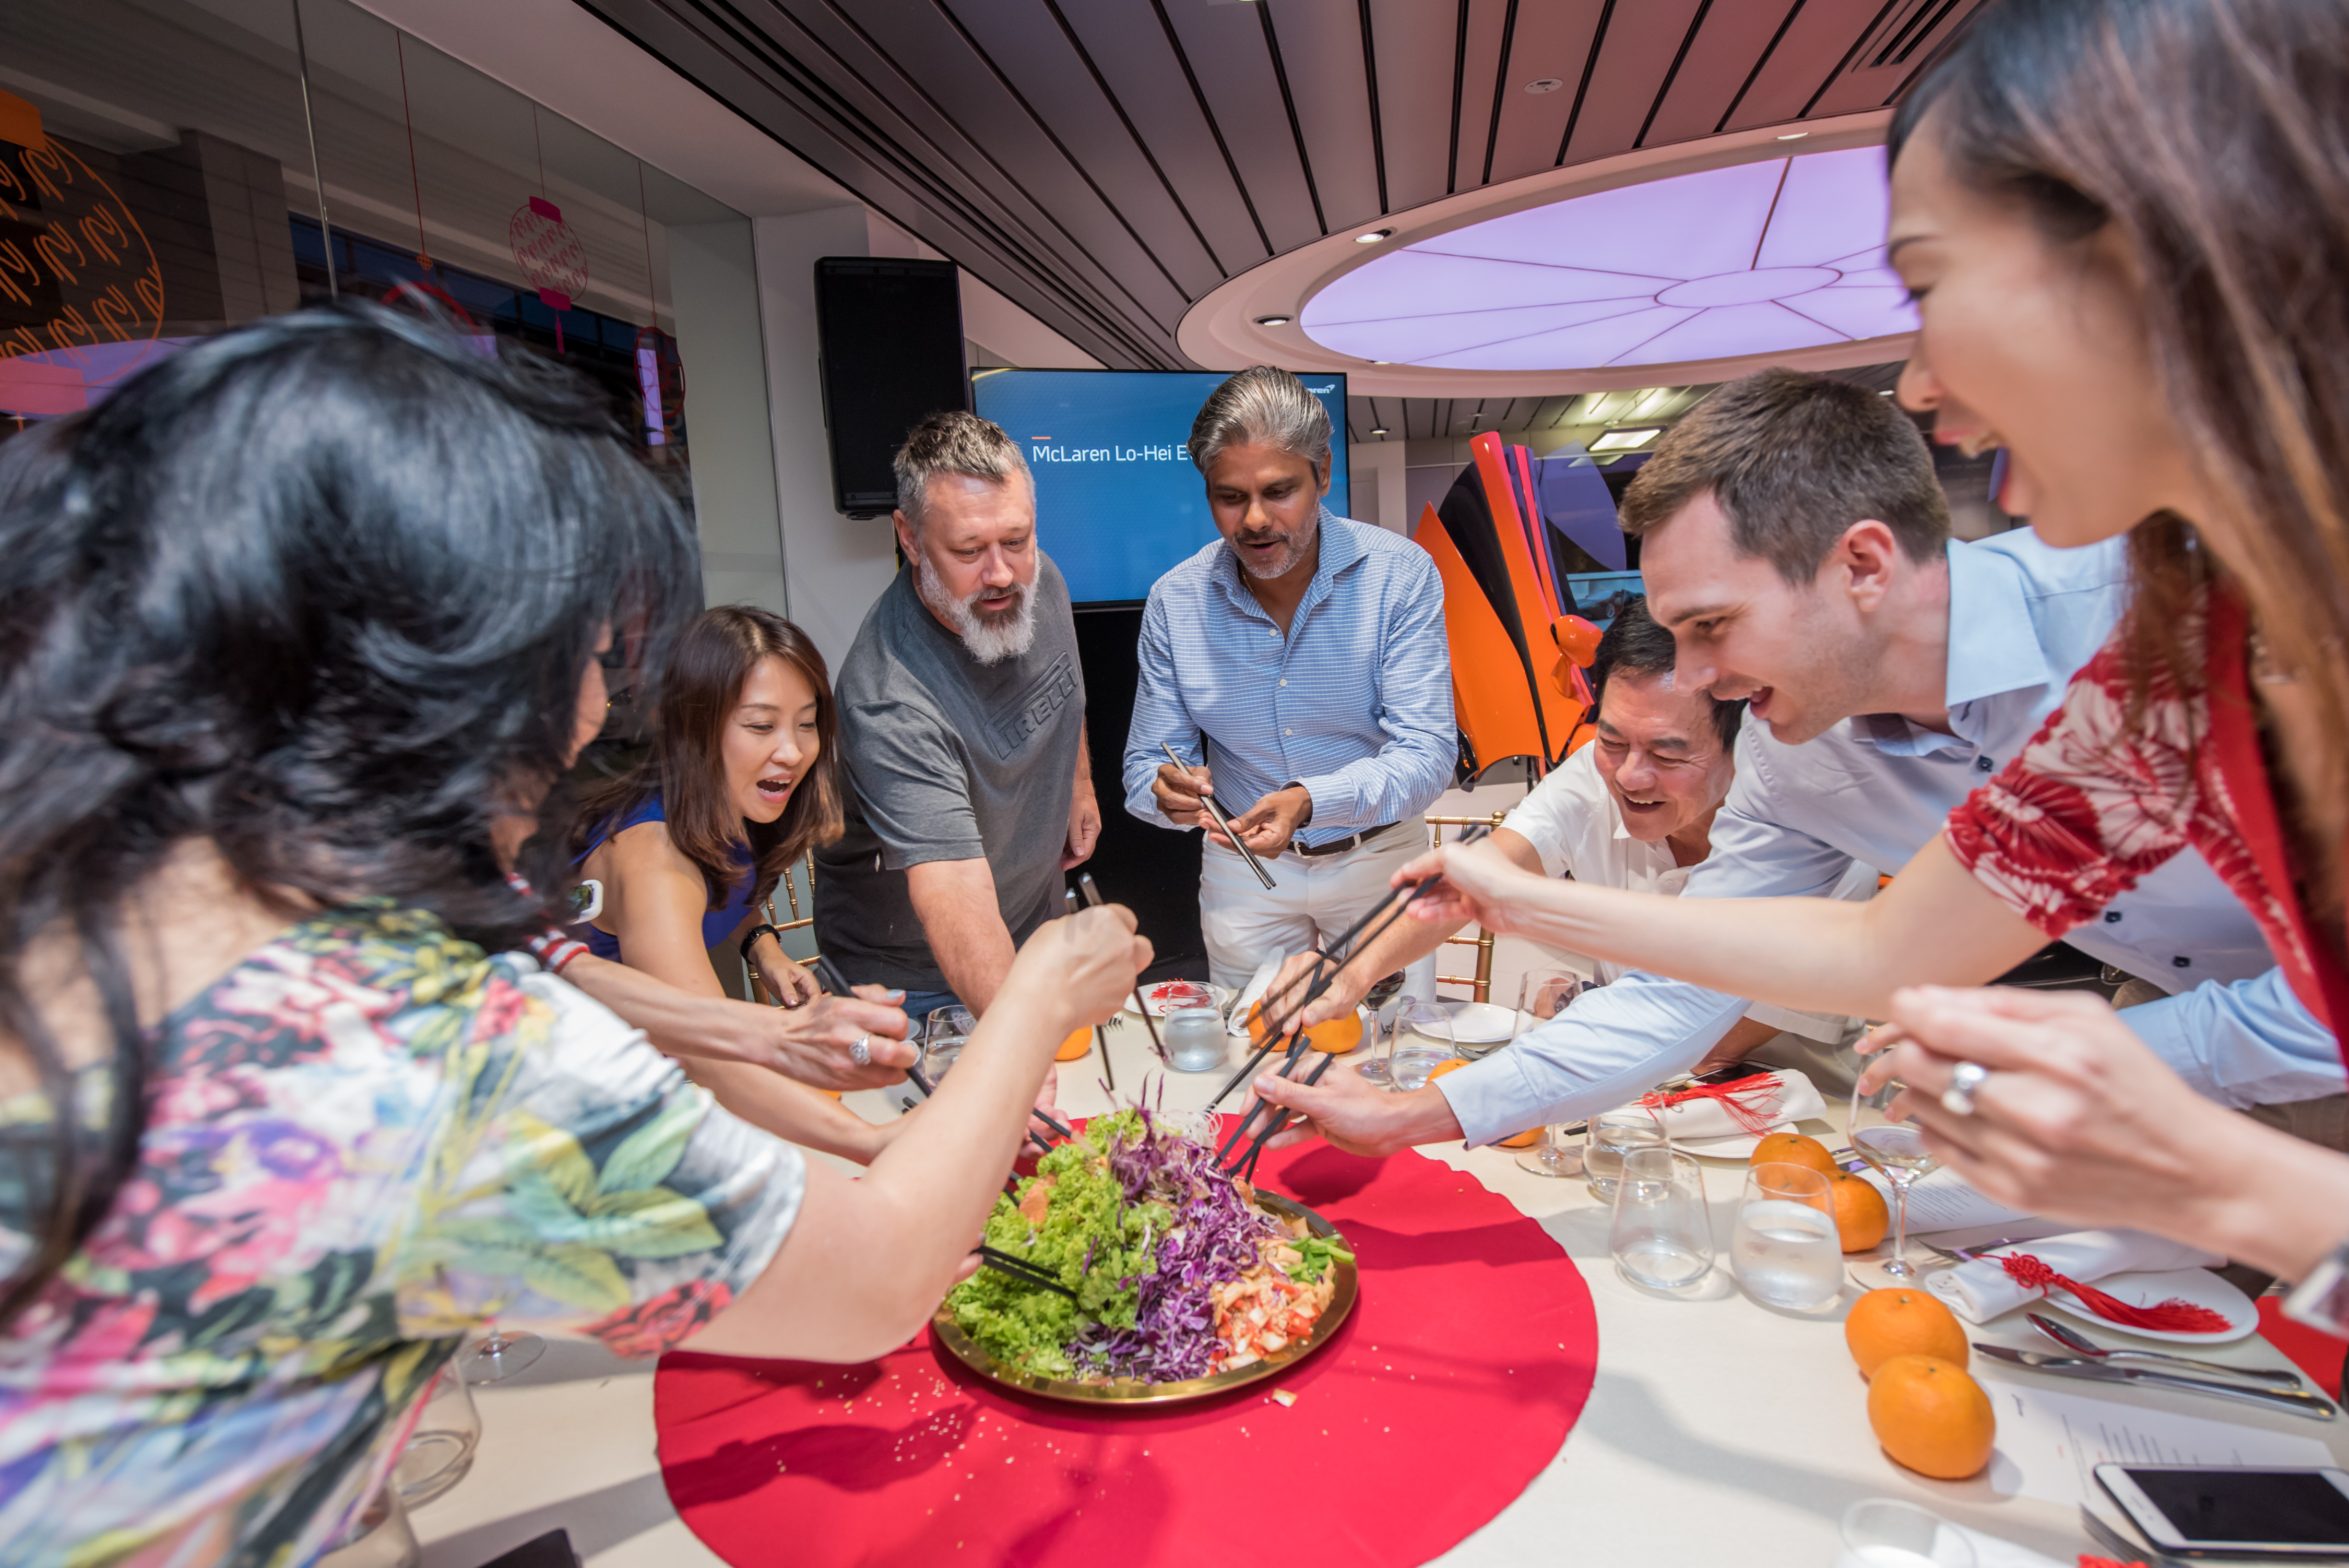 McLaren owners and staff tossing to a year of good health and wealth